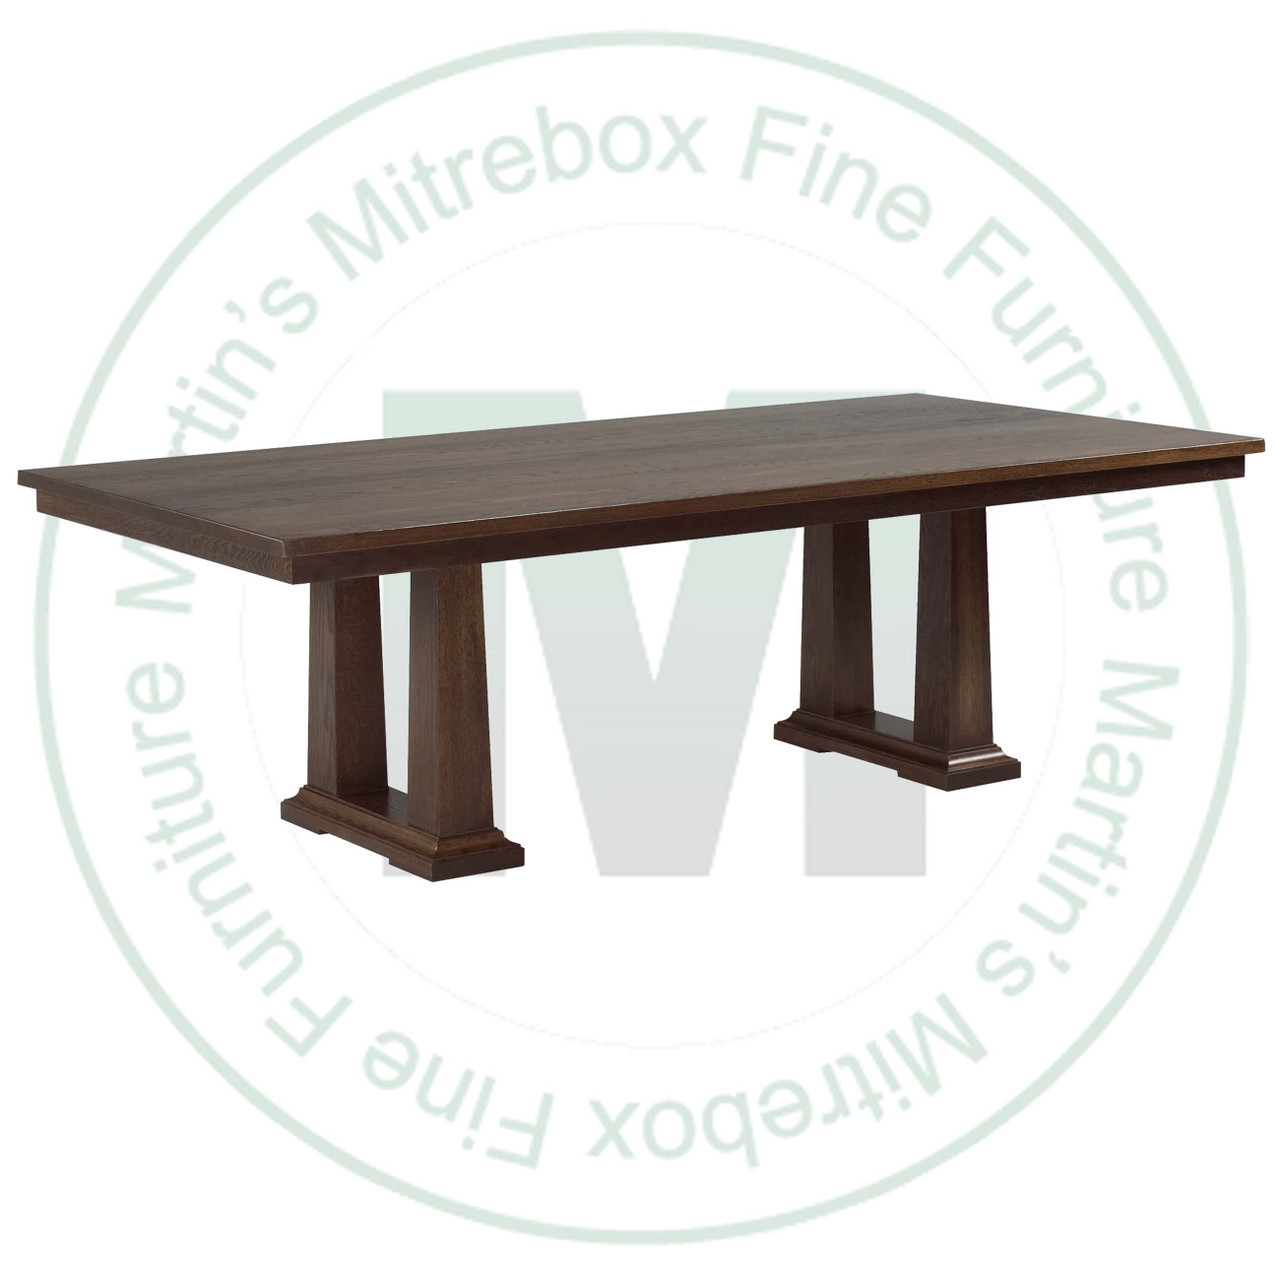 Oak Acropolis Extension Double Pedestal Table 42''D x 84''W x 30''H With 4 - 12'' Leaves Table Has 1.25'' Thick Top